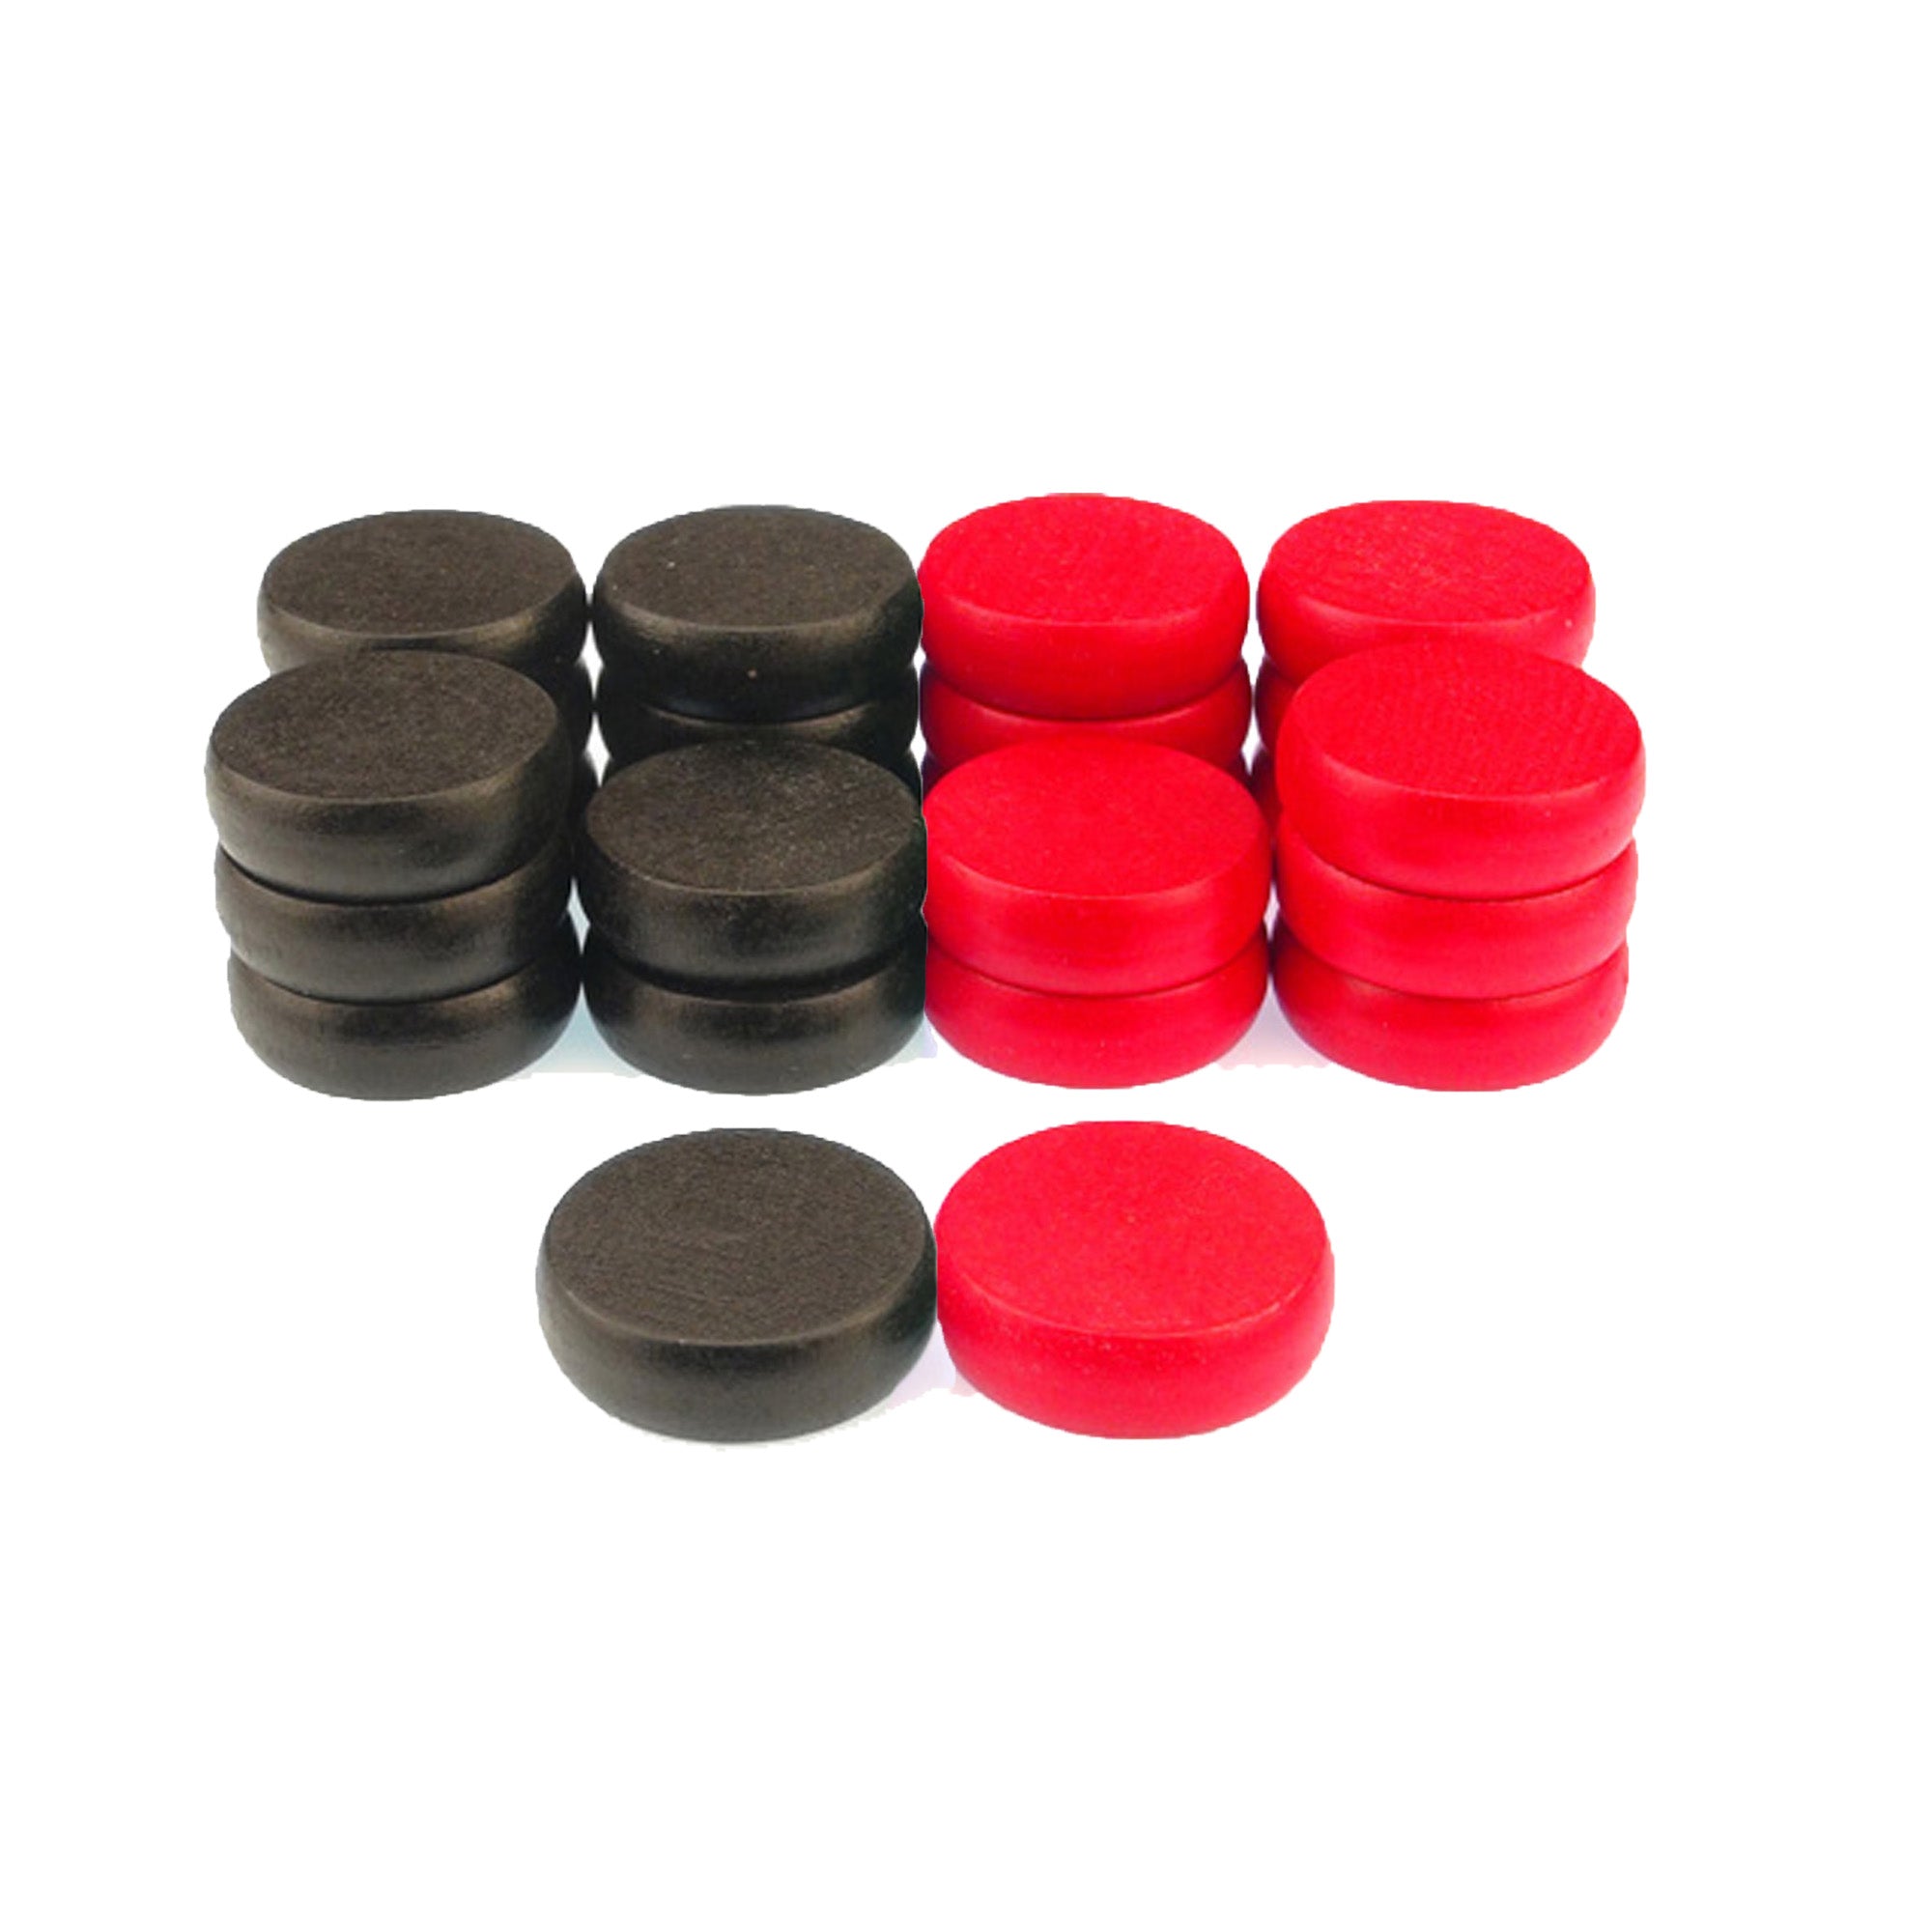 Crokinole Tournament Discs - 13 Black and 13 Red - Size 1-1/4" - 24 Needed + 2 Spare Discs - Bag Included - Carrom Alternative